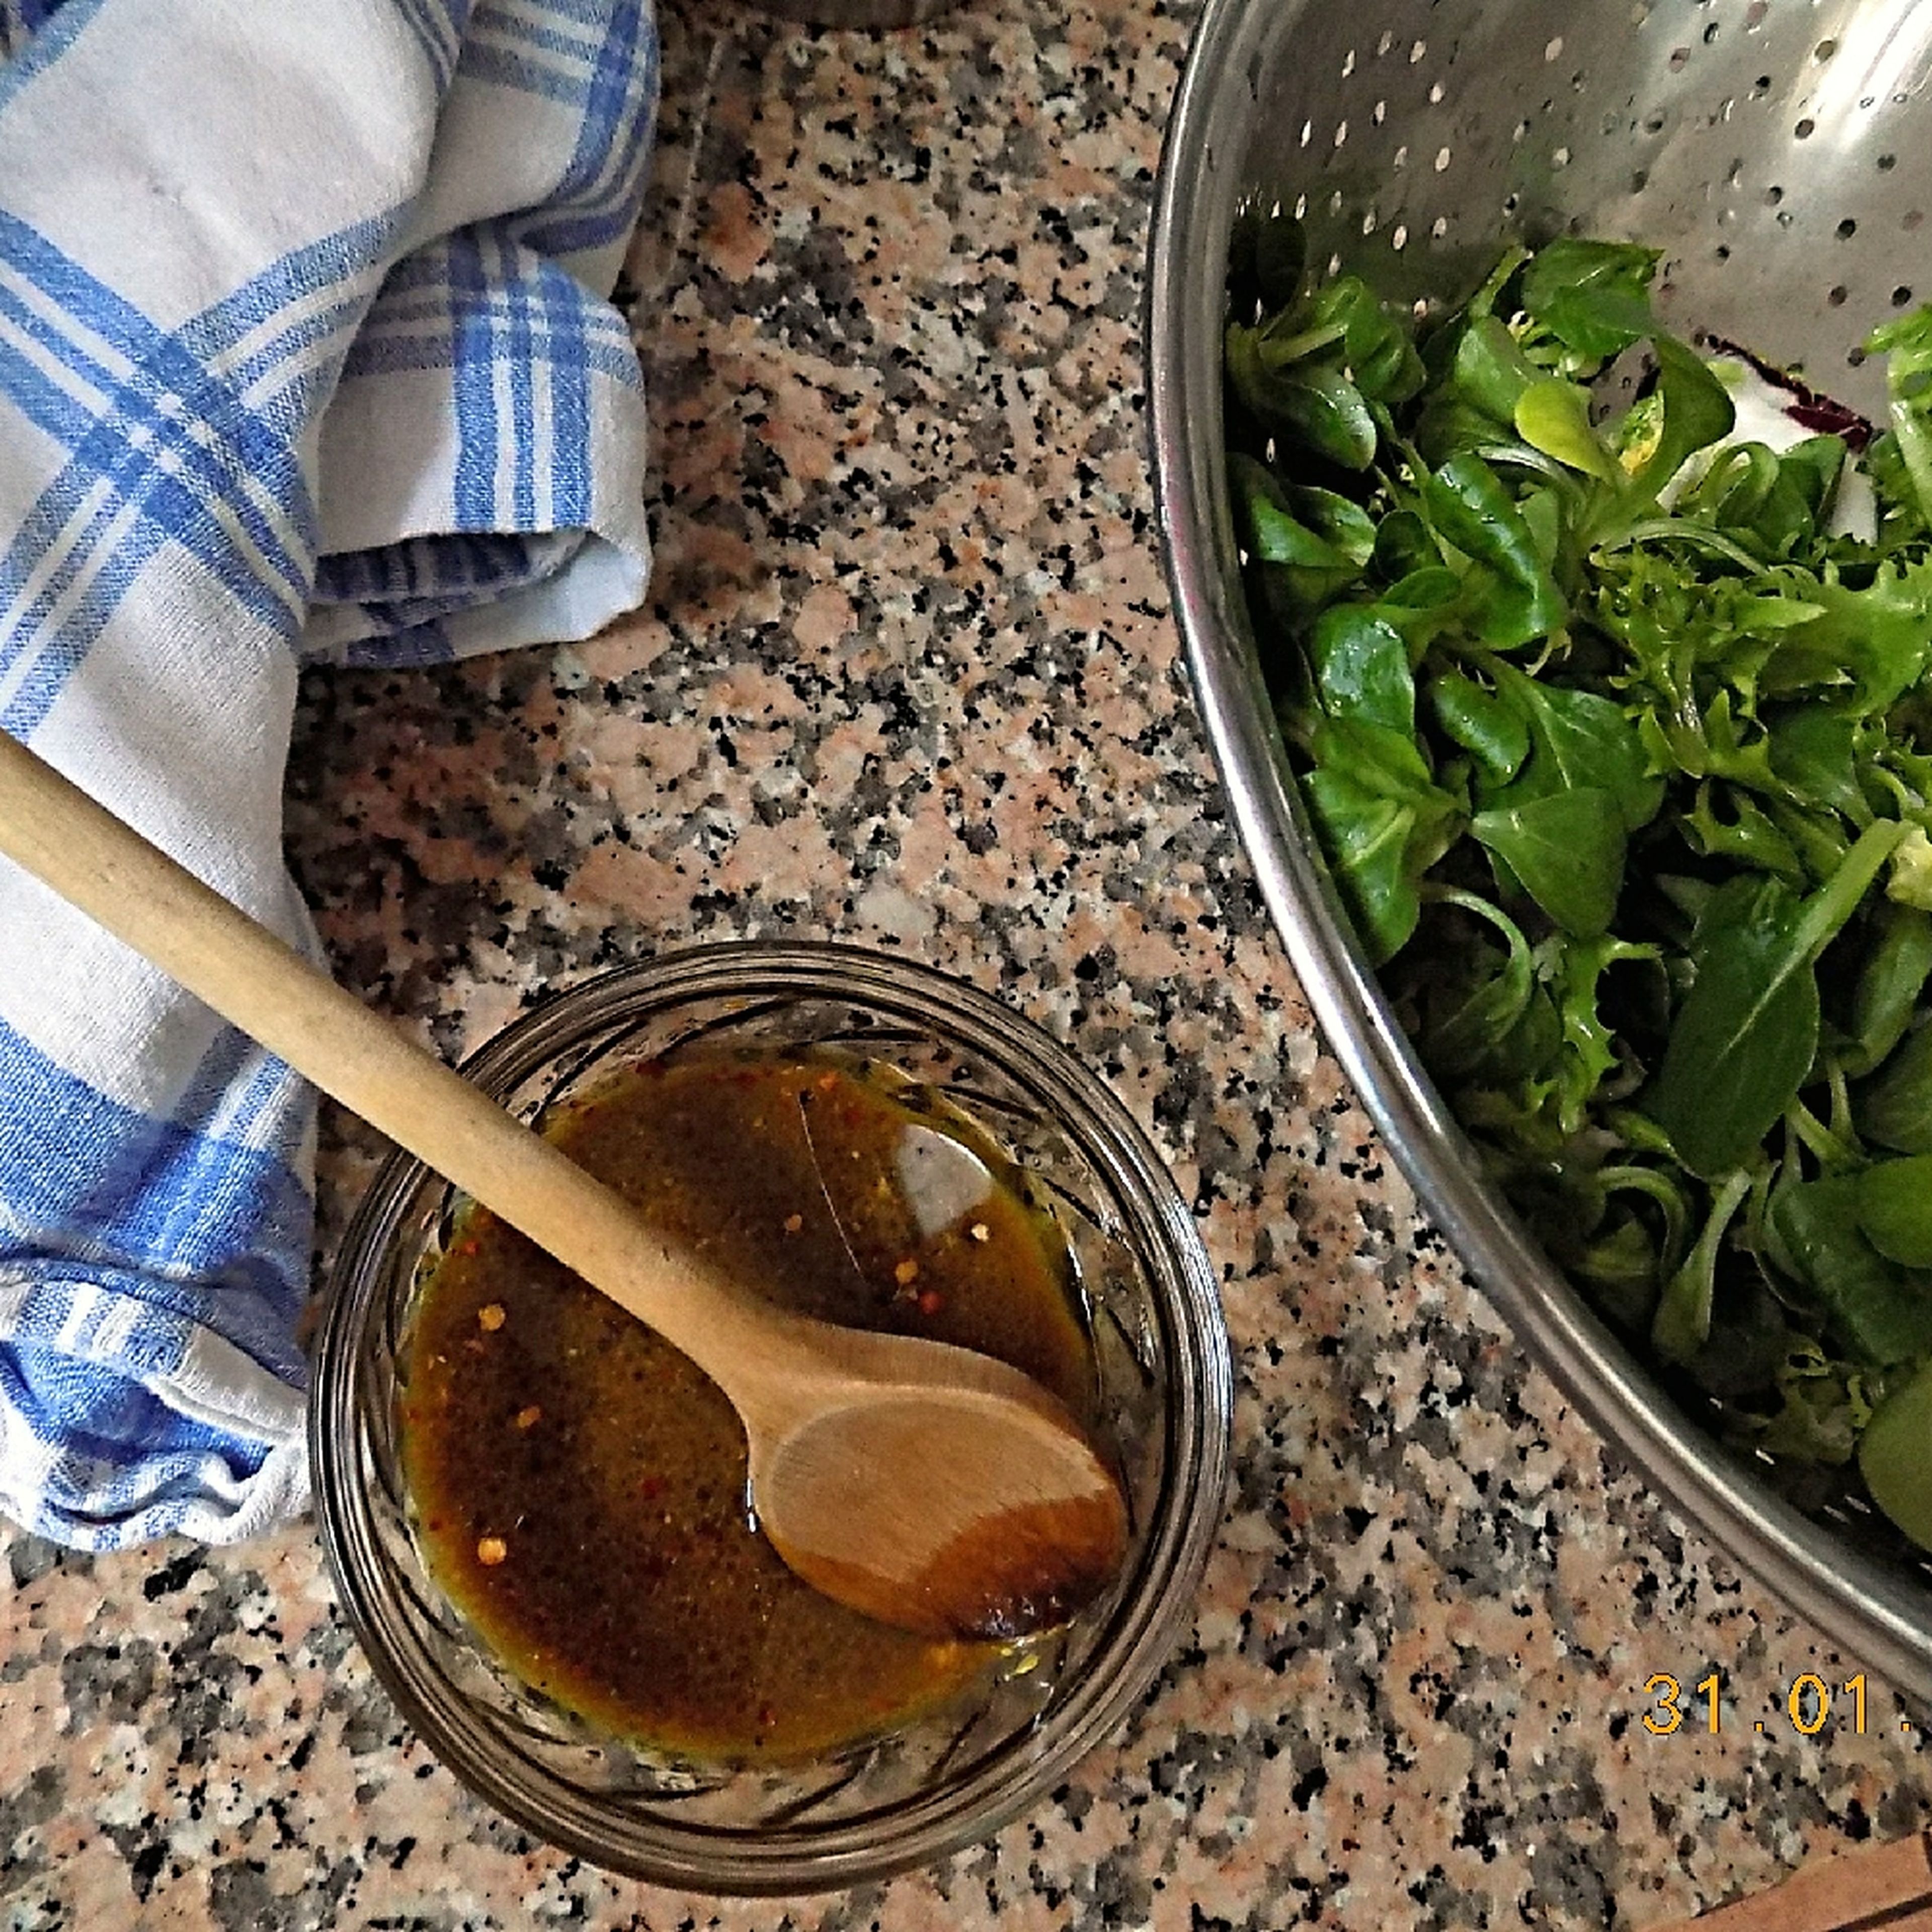 Wash and drain the lamb’s lettuce. Mix olive oil, honey, mustard, balsamic vinegar, and water. Season with chili flakes, salt, and pepper. Don’t combine lettuce and vinaigrette yet.